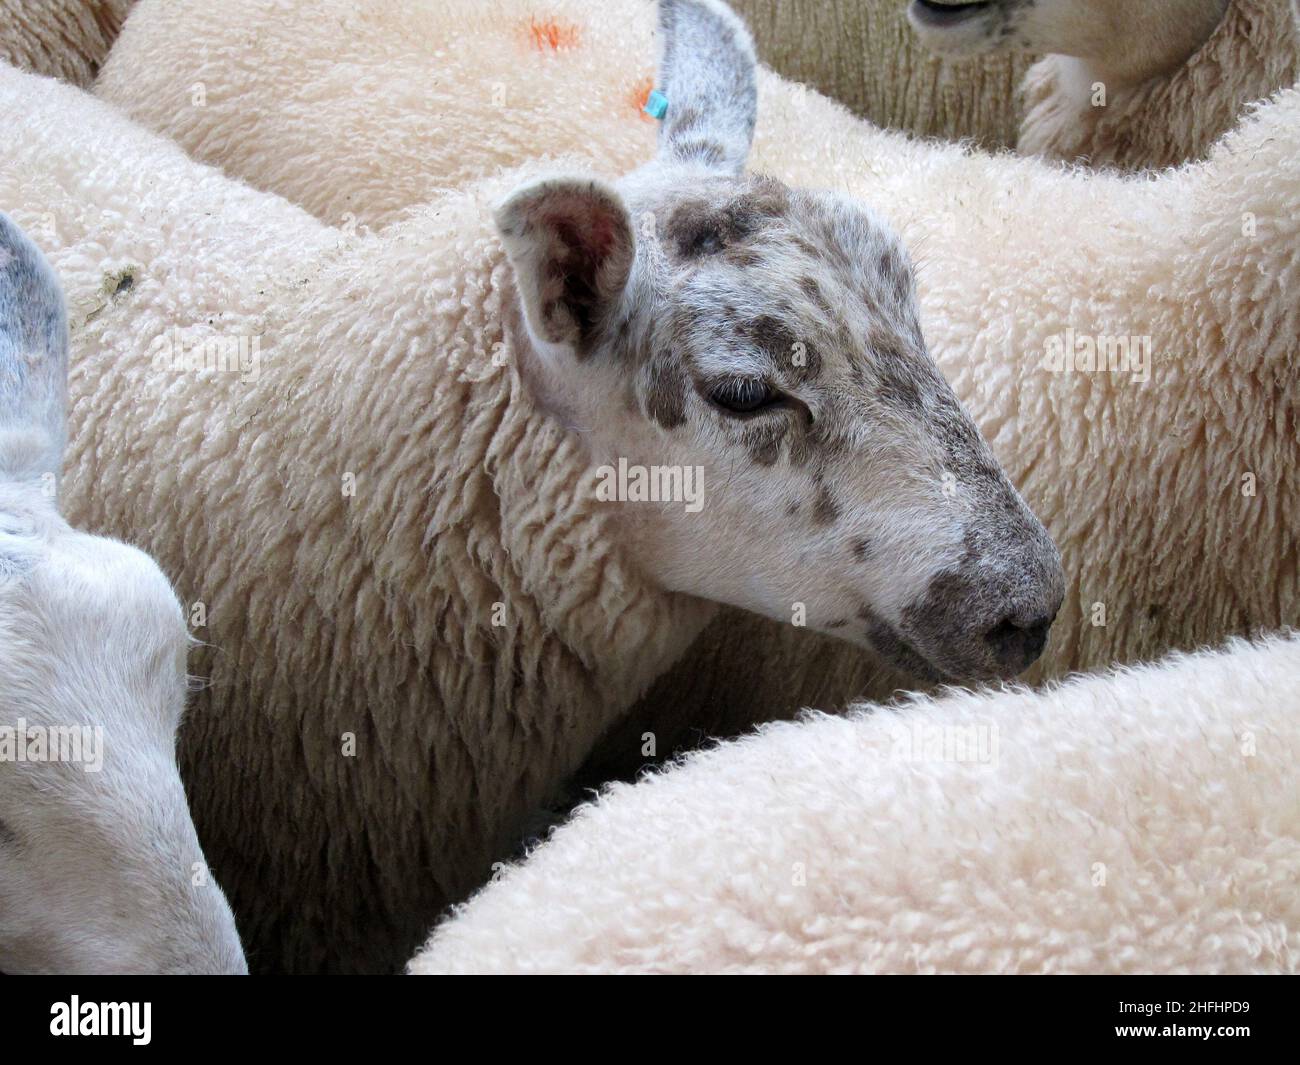 August 2012 - Sheep faces at a livestock market Stock Photo